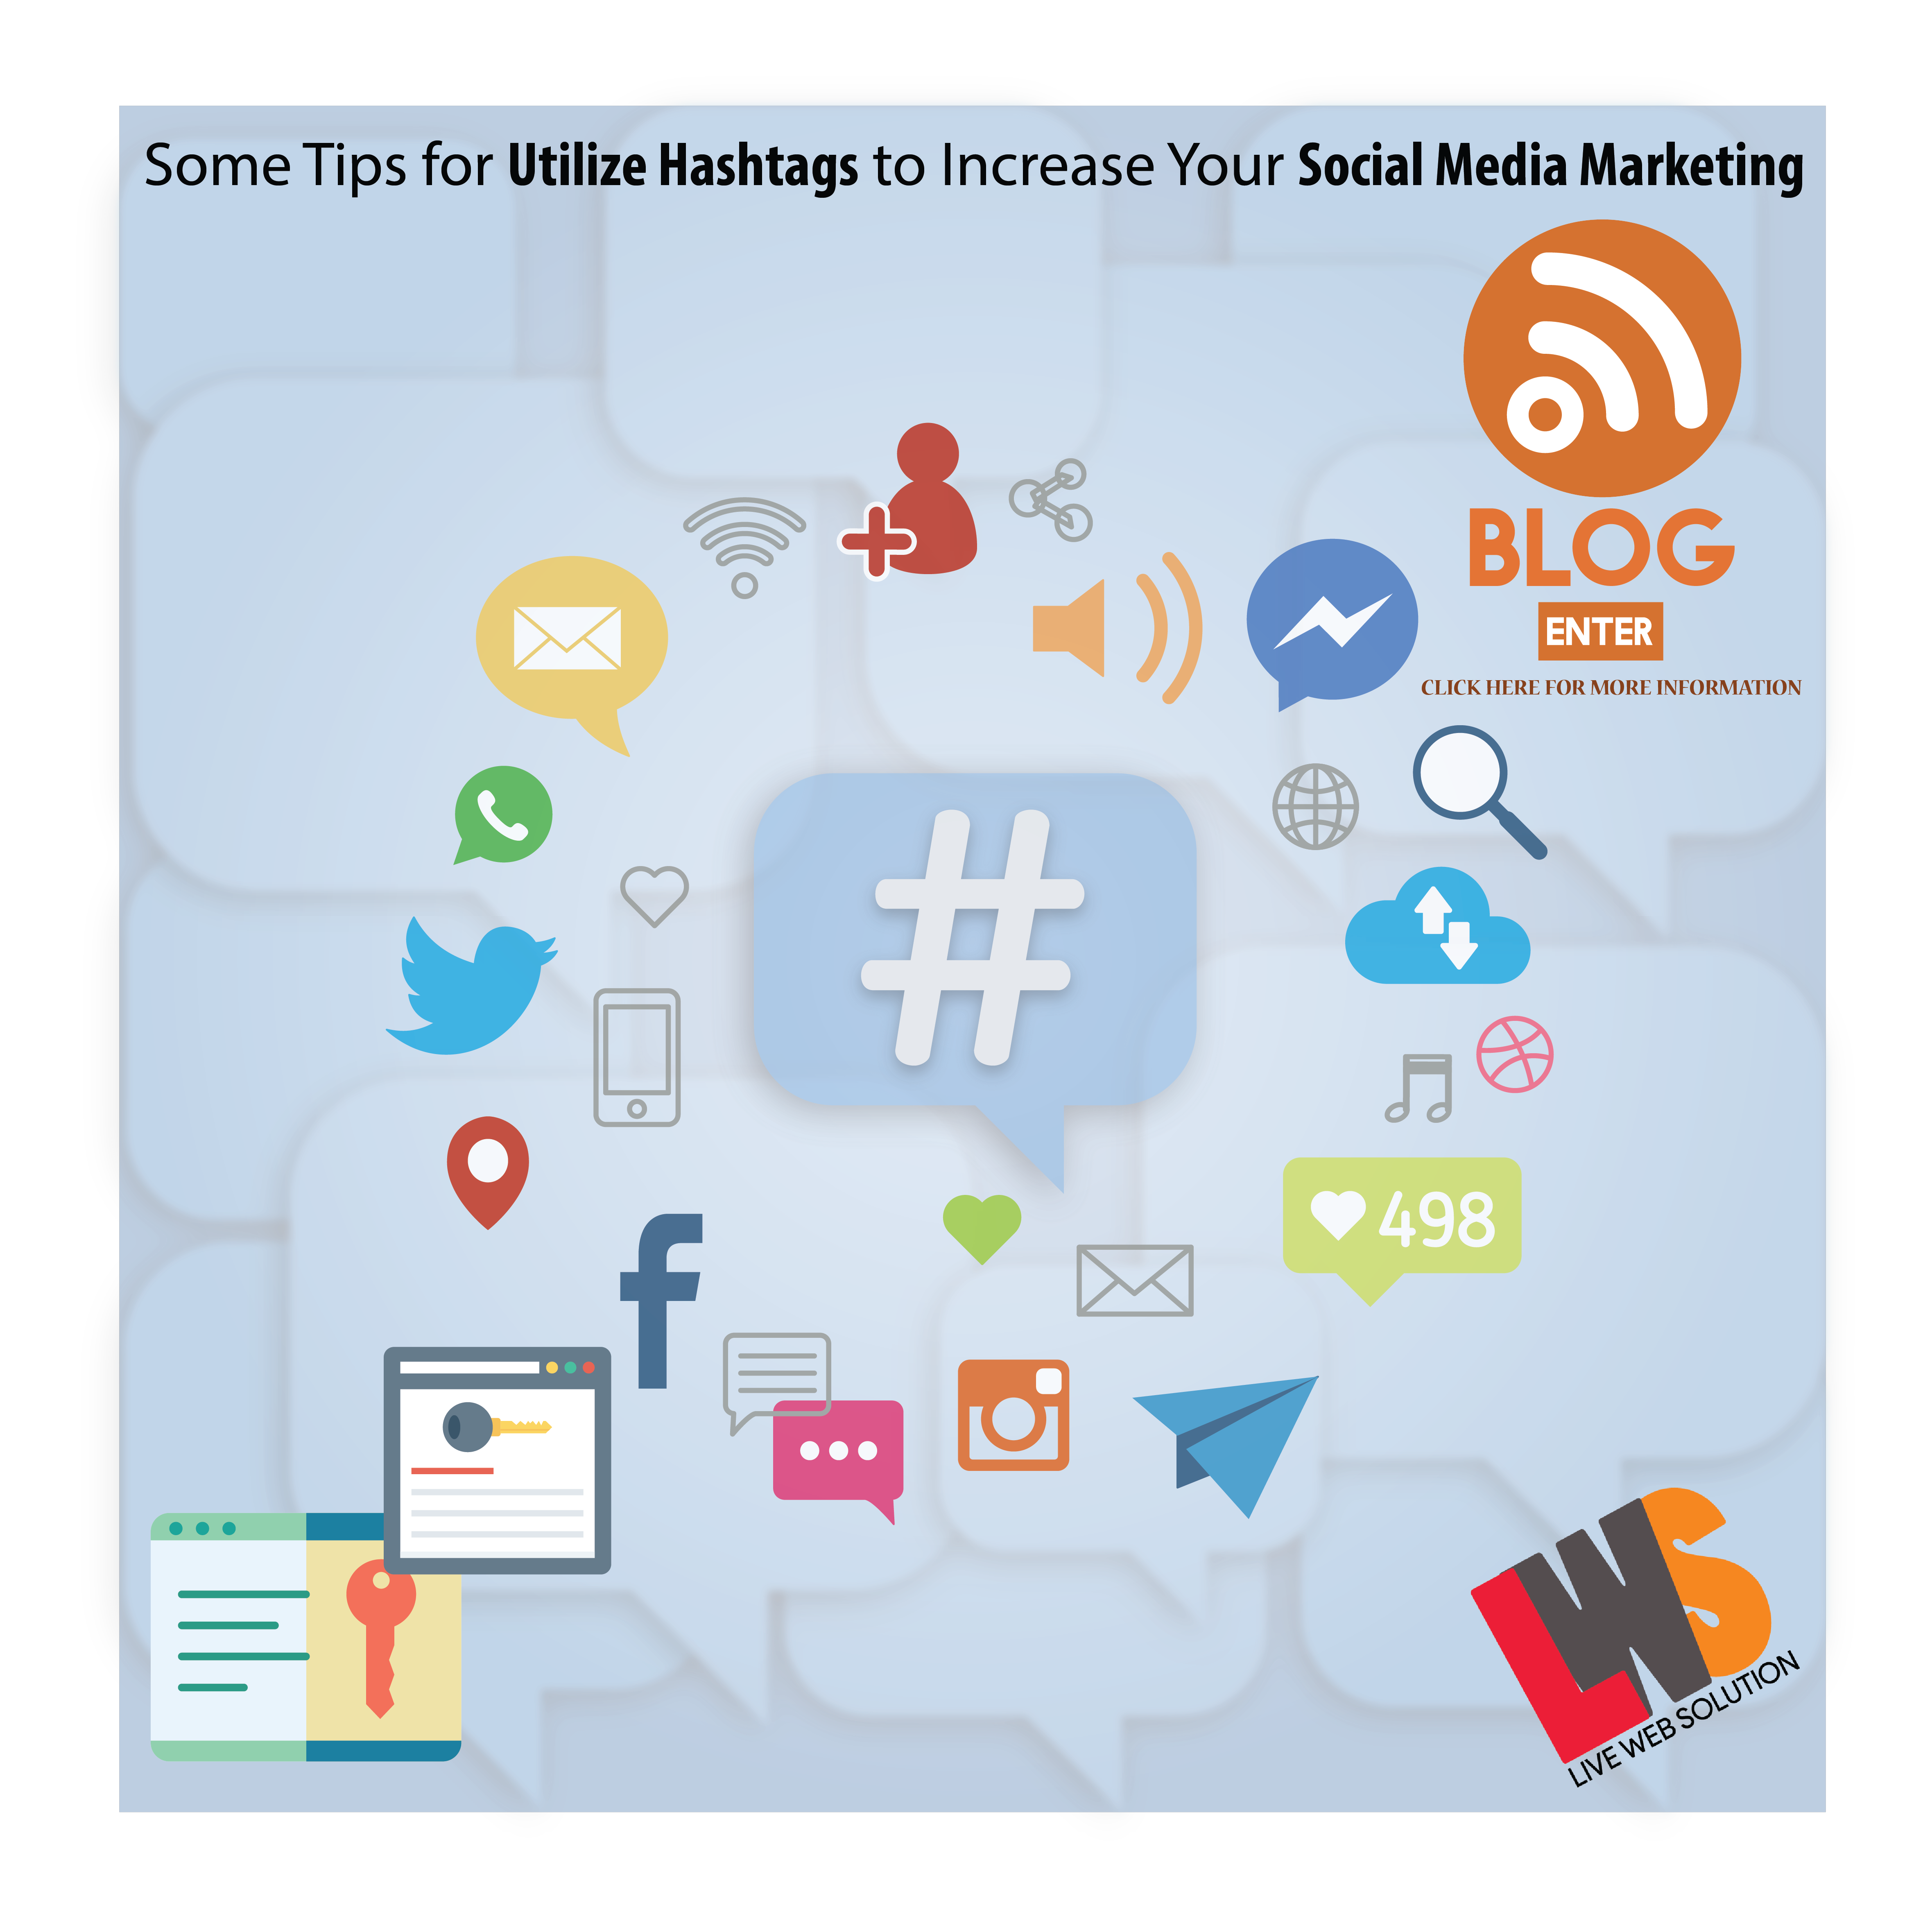 Some Tips for Utilize Hashtags to Increase Your Social Media Marketing